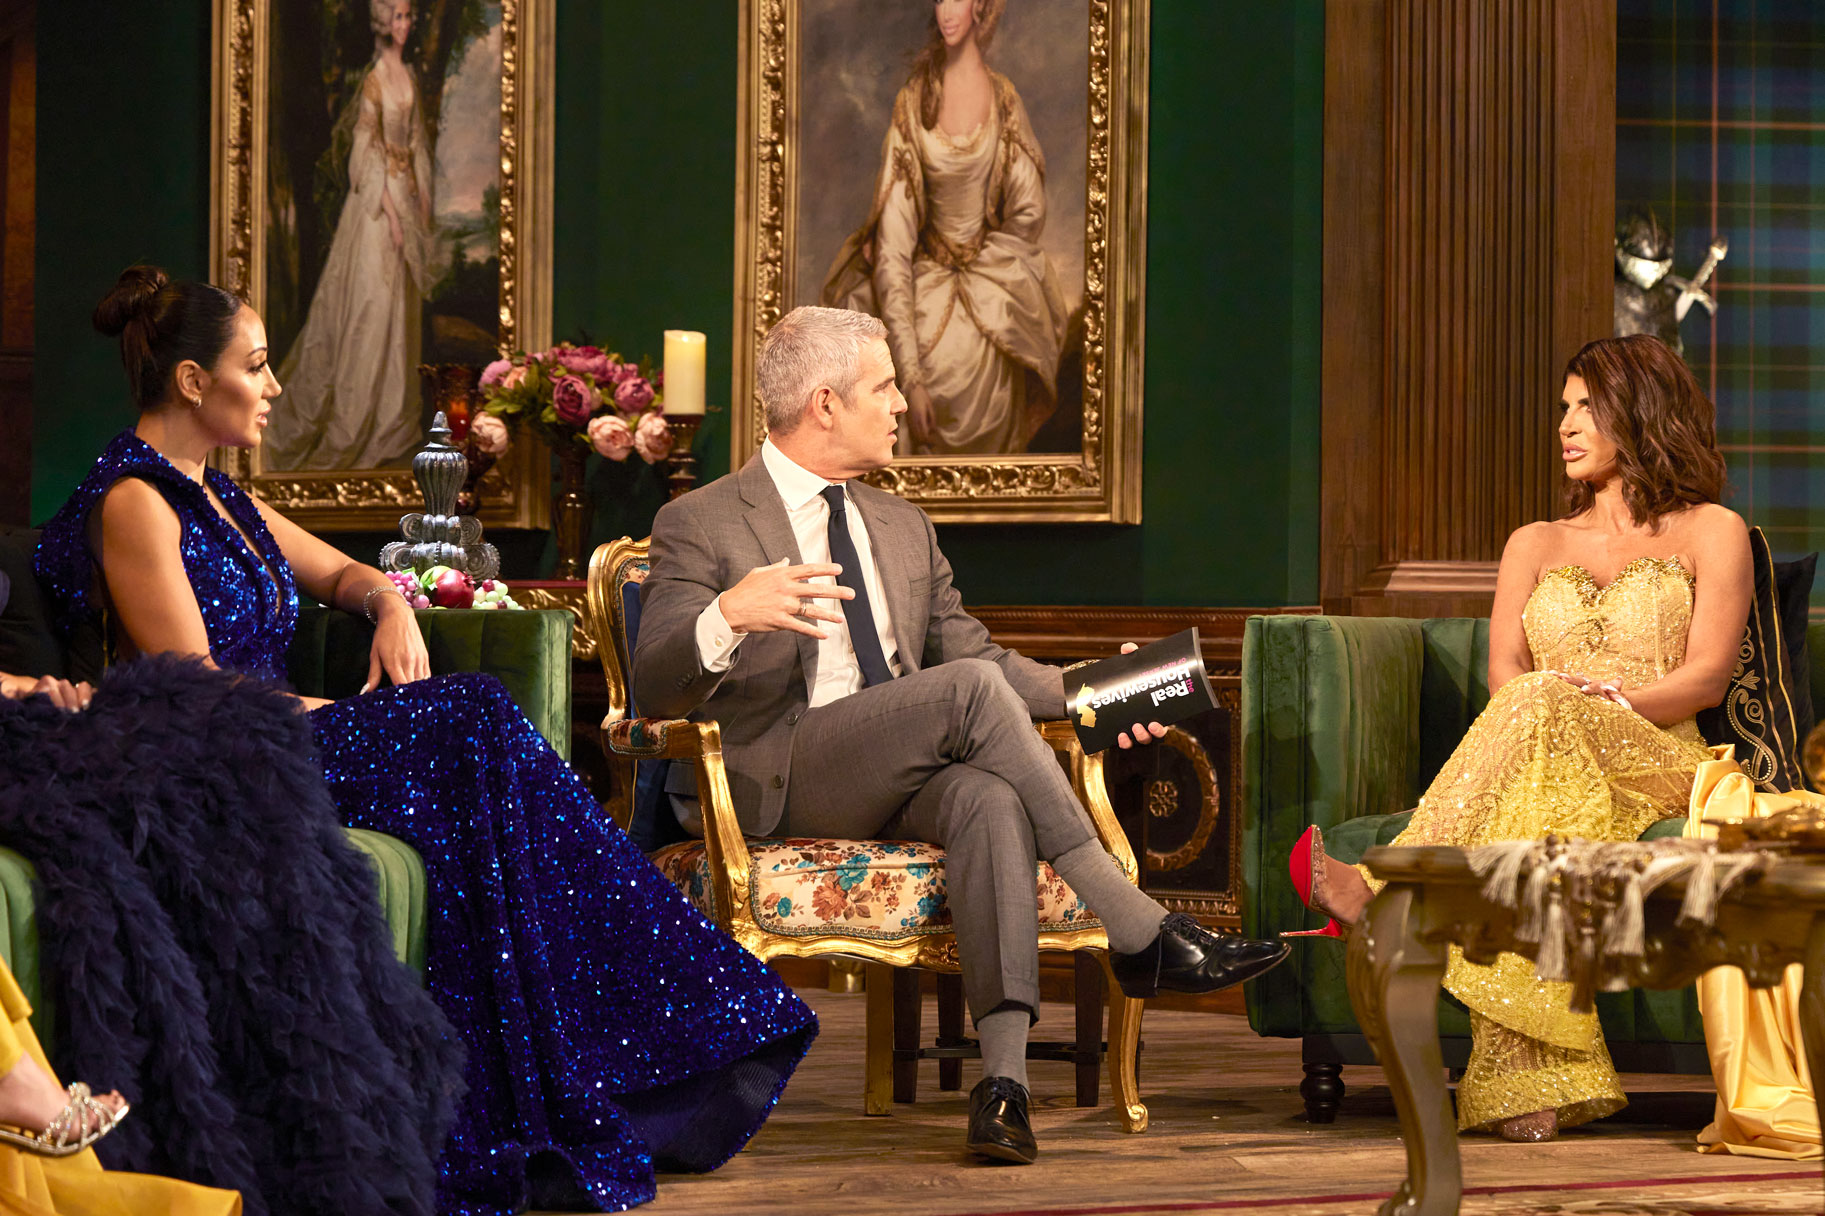 Melissa Gorga, Andy Cohen, and Teresa Giudice at the Real Housewives of New Jersey reunion